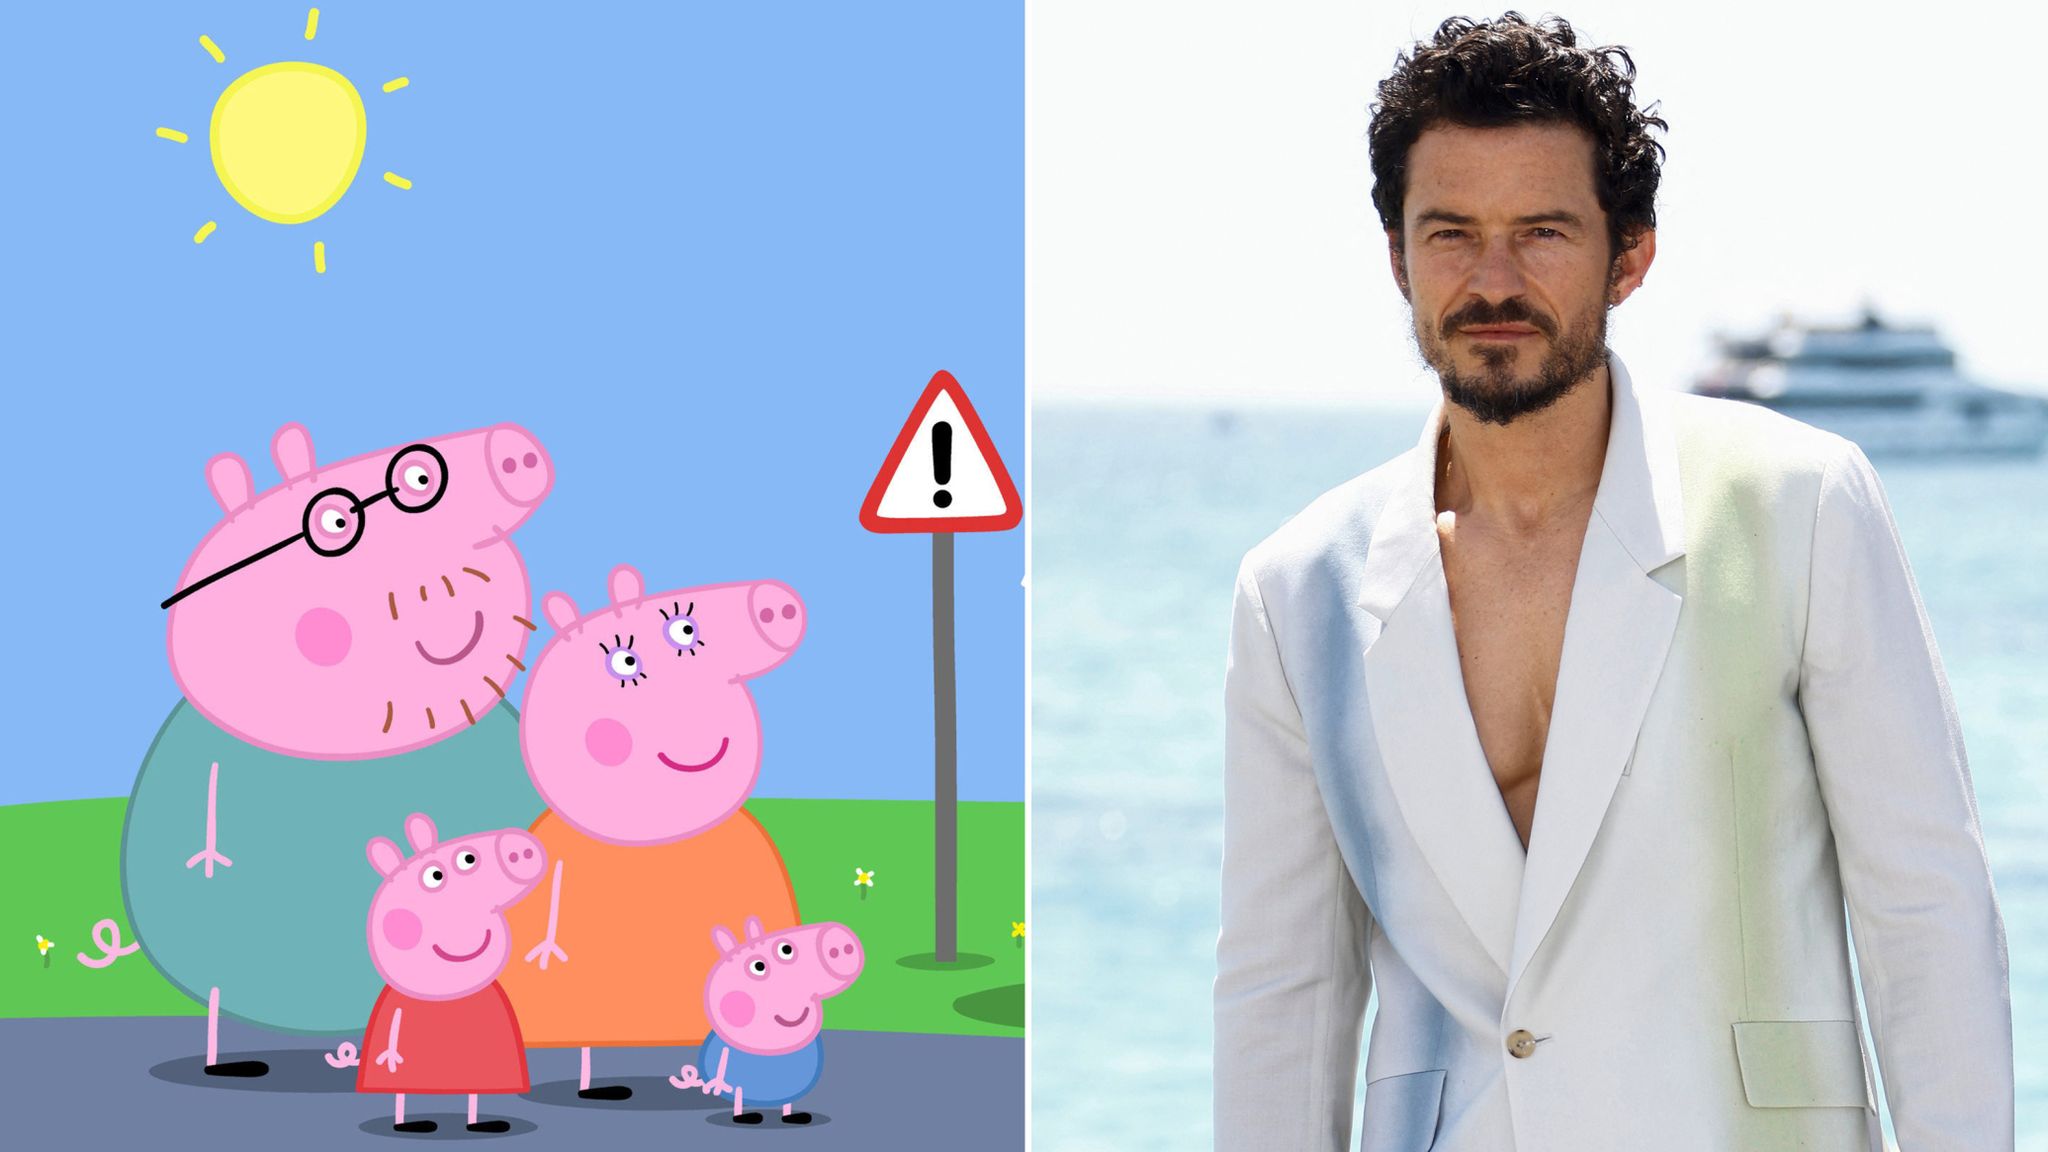 Orlando Bloom joins Katy Perry in special Peppa Pig guest appearance, Ents  & Arts News